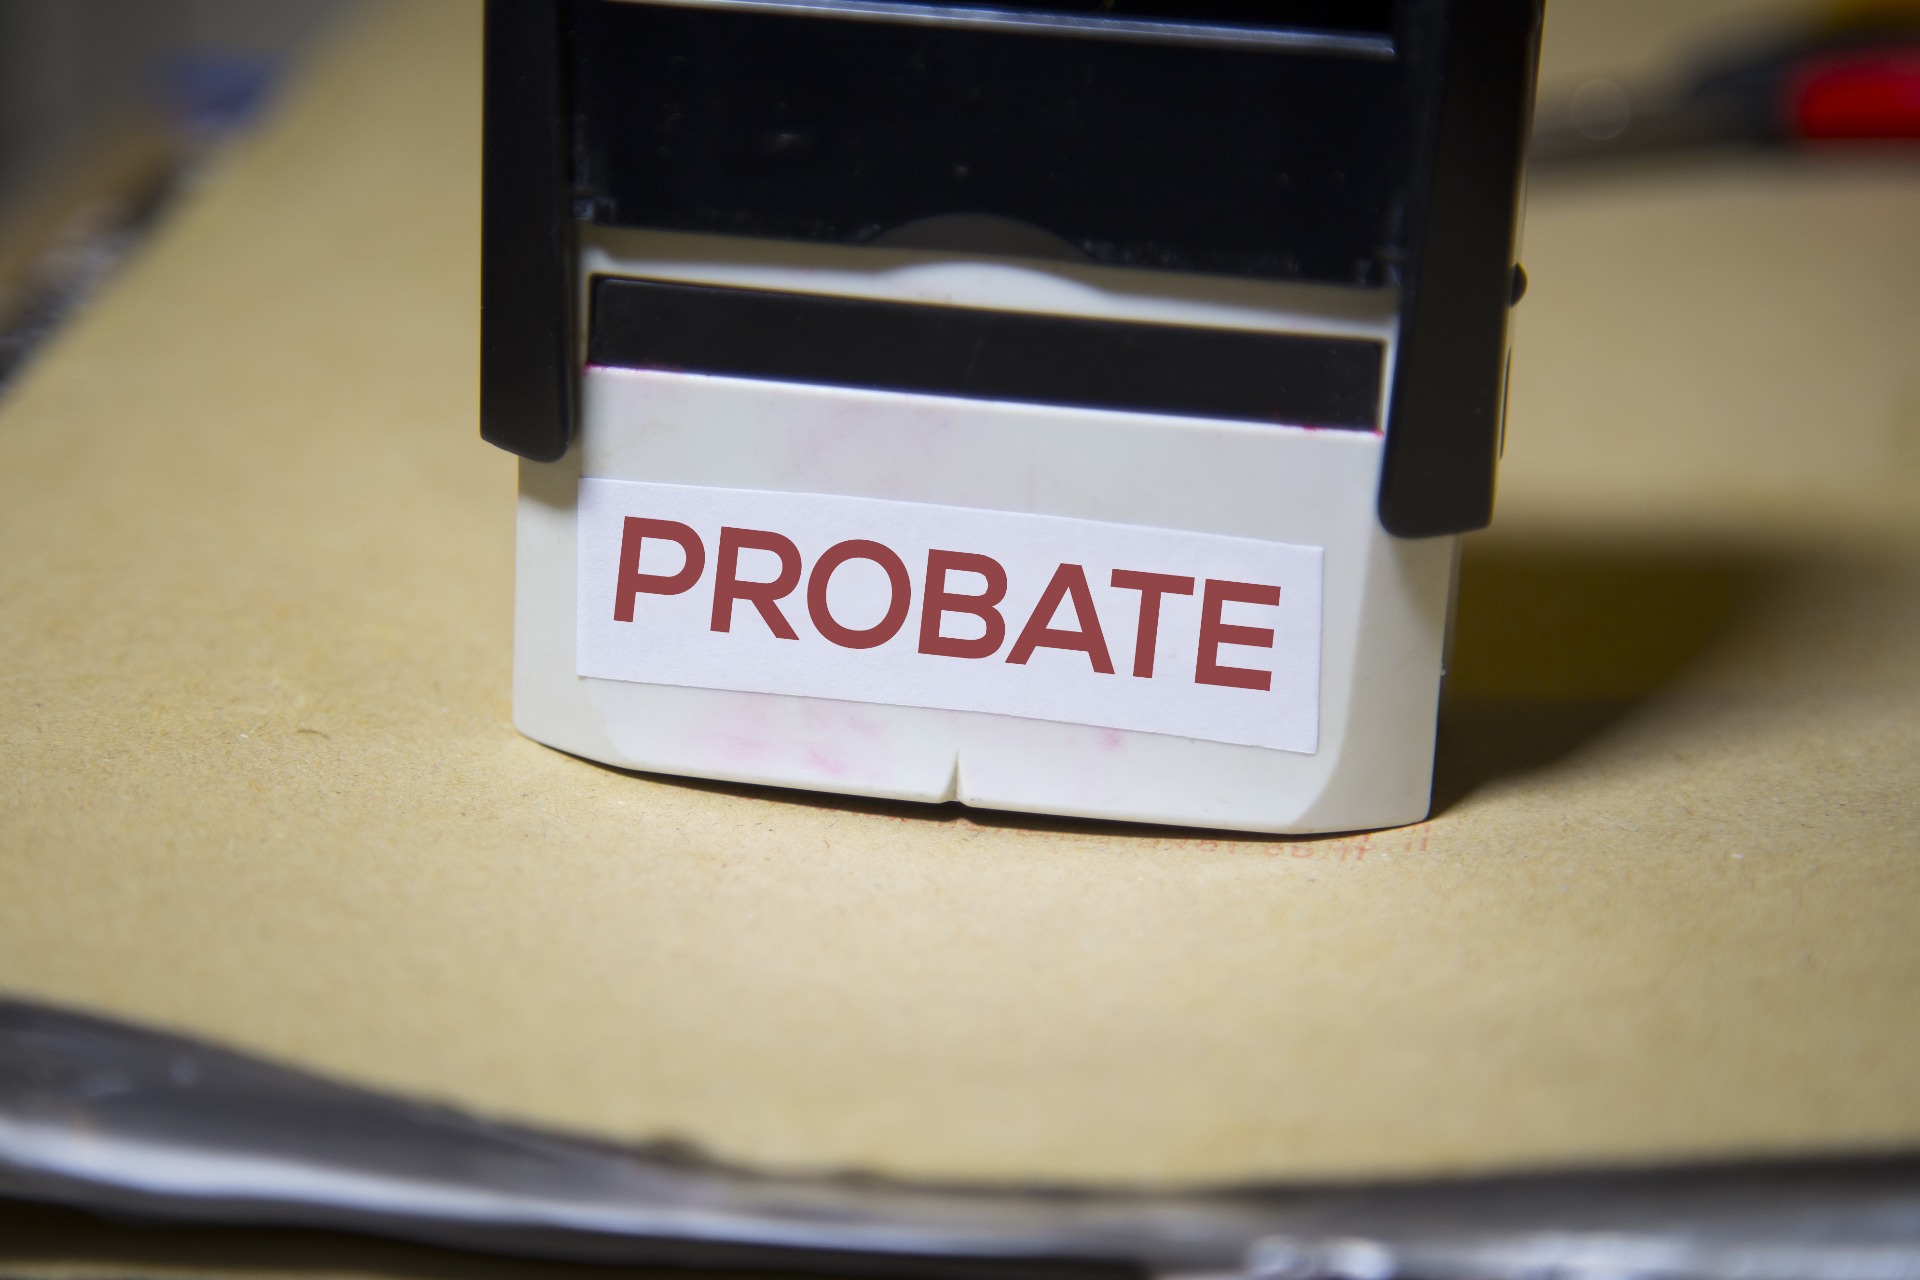 A Probate stamp, in red ink; our Probate solicitors can assist with probate matters. Click this image to find out more.